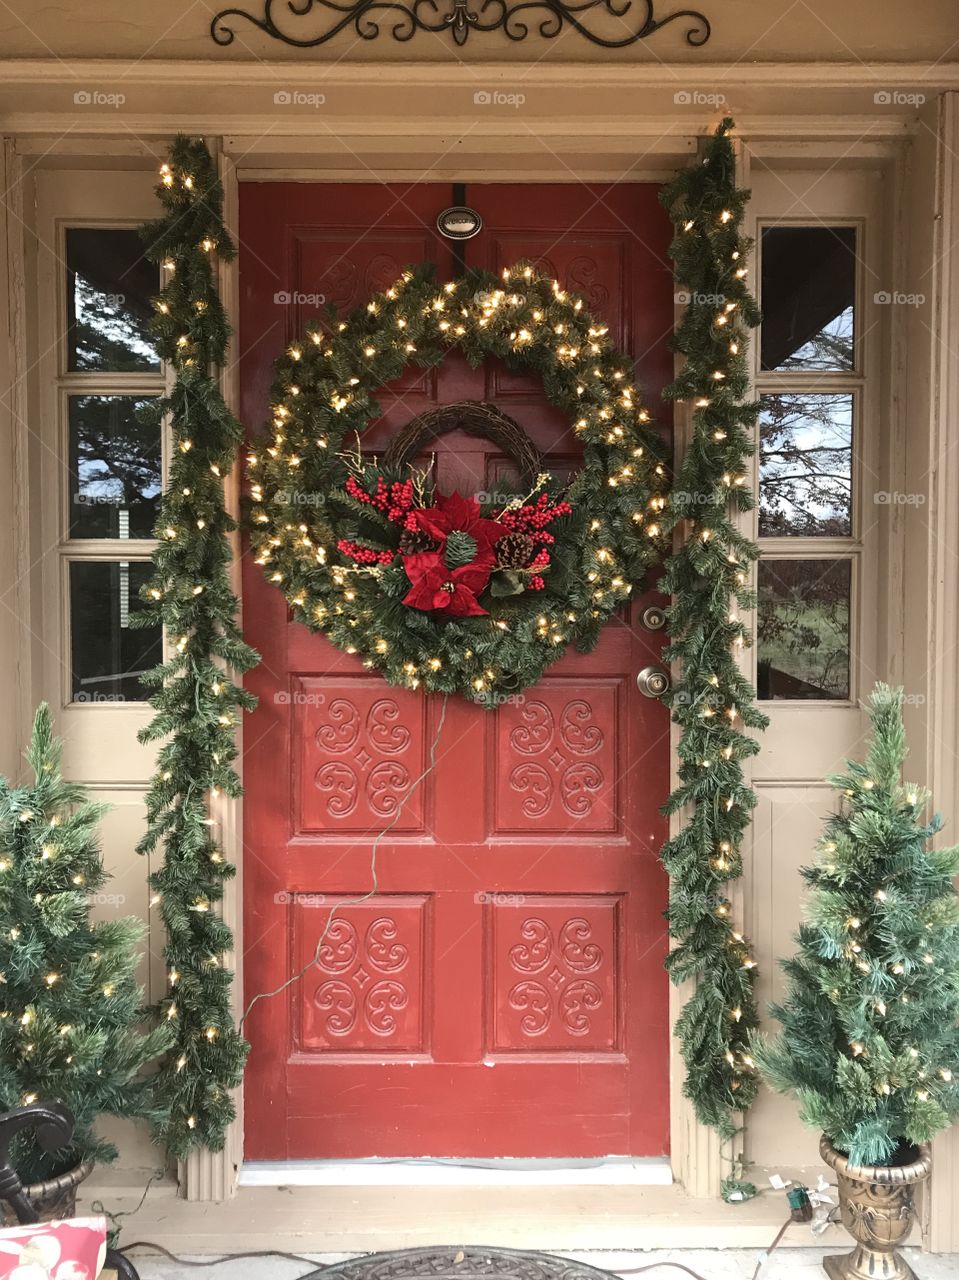 The joy of Christmas! Front entry door decked out in greenery and lights is sure to give a warm welcome to all who enter.